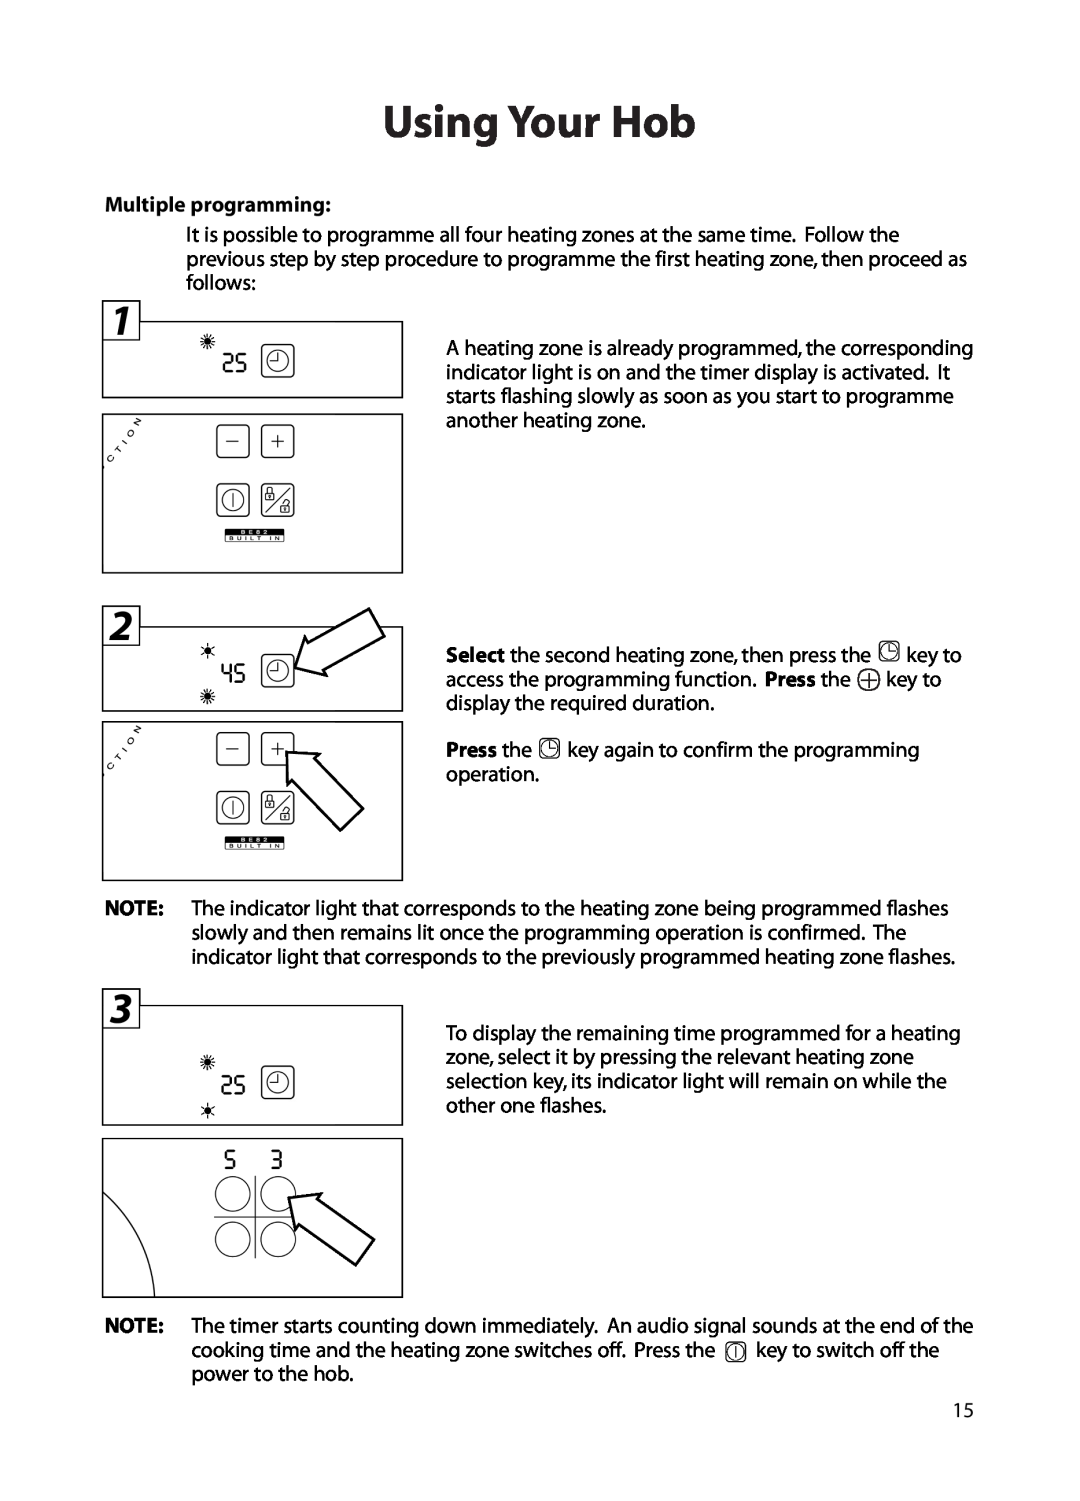 Hotpoint BE82 manual Multiple programming, Press the, Using Your Hob 